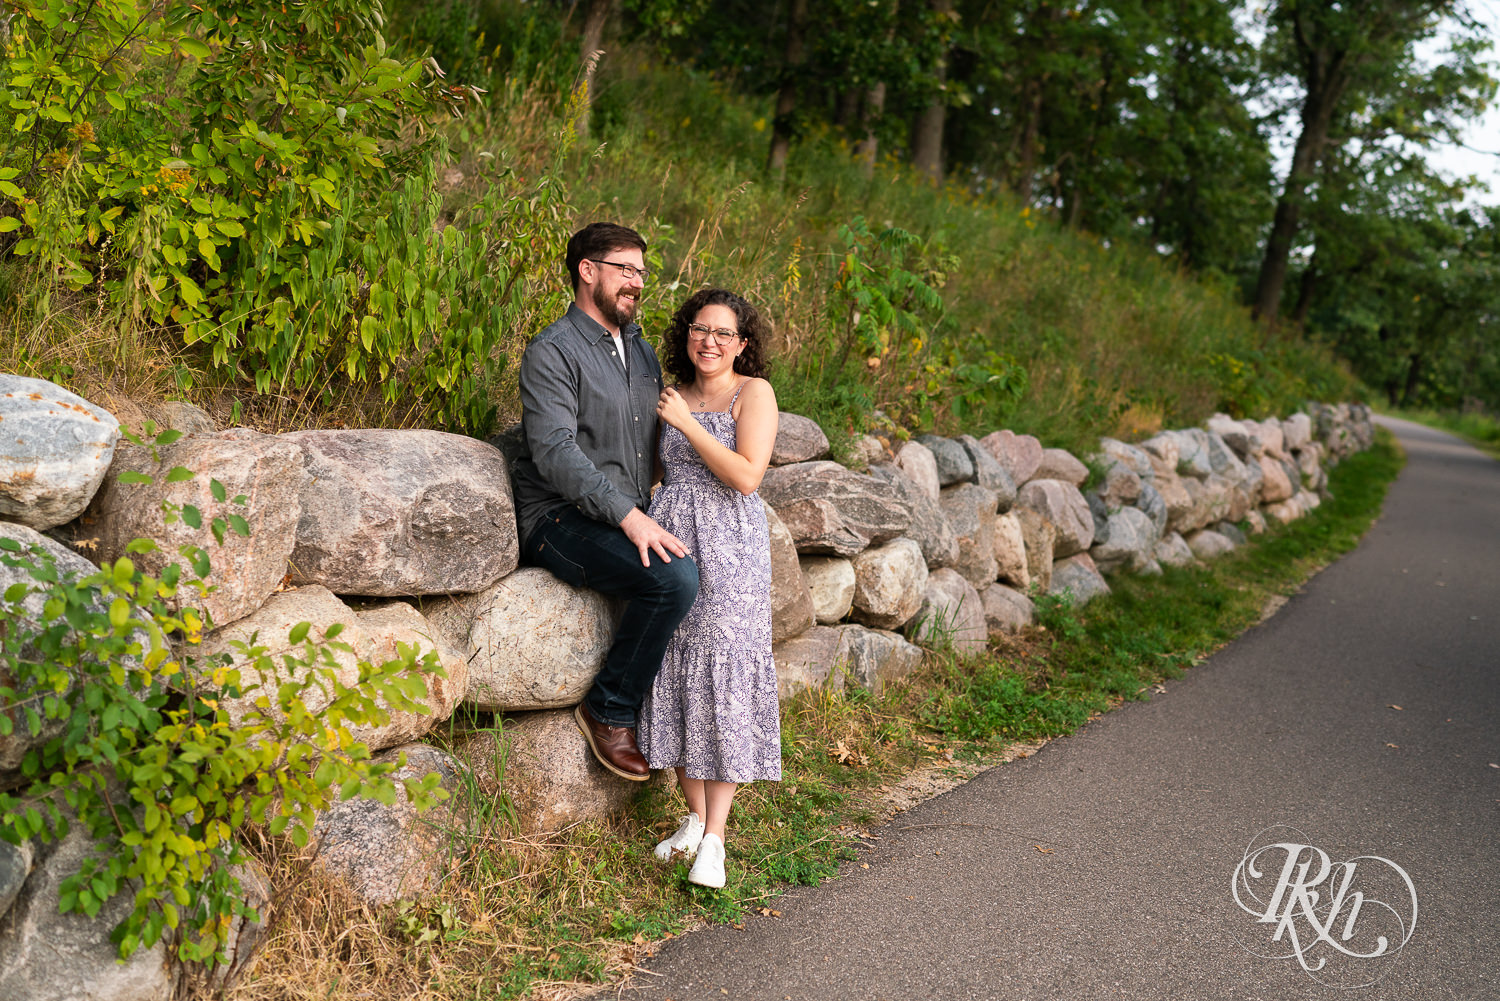 Man and woman in glasses laughing at sunset engagement session in Eagan, Minnesota.